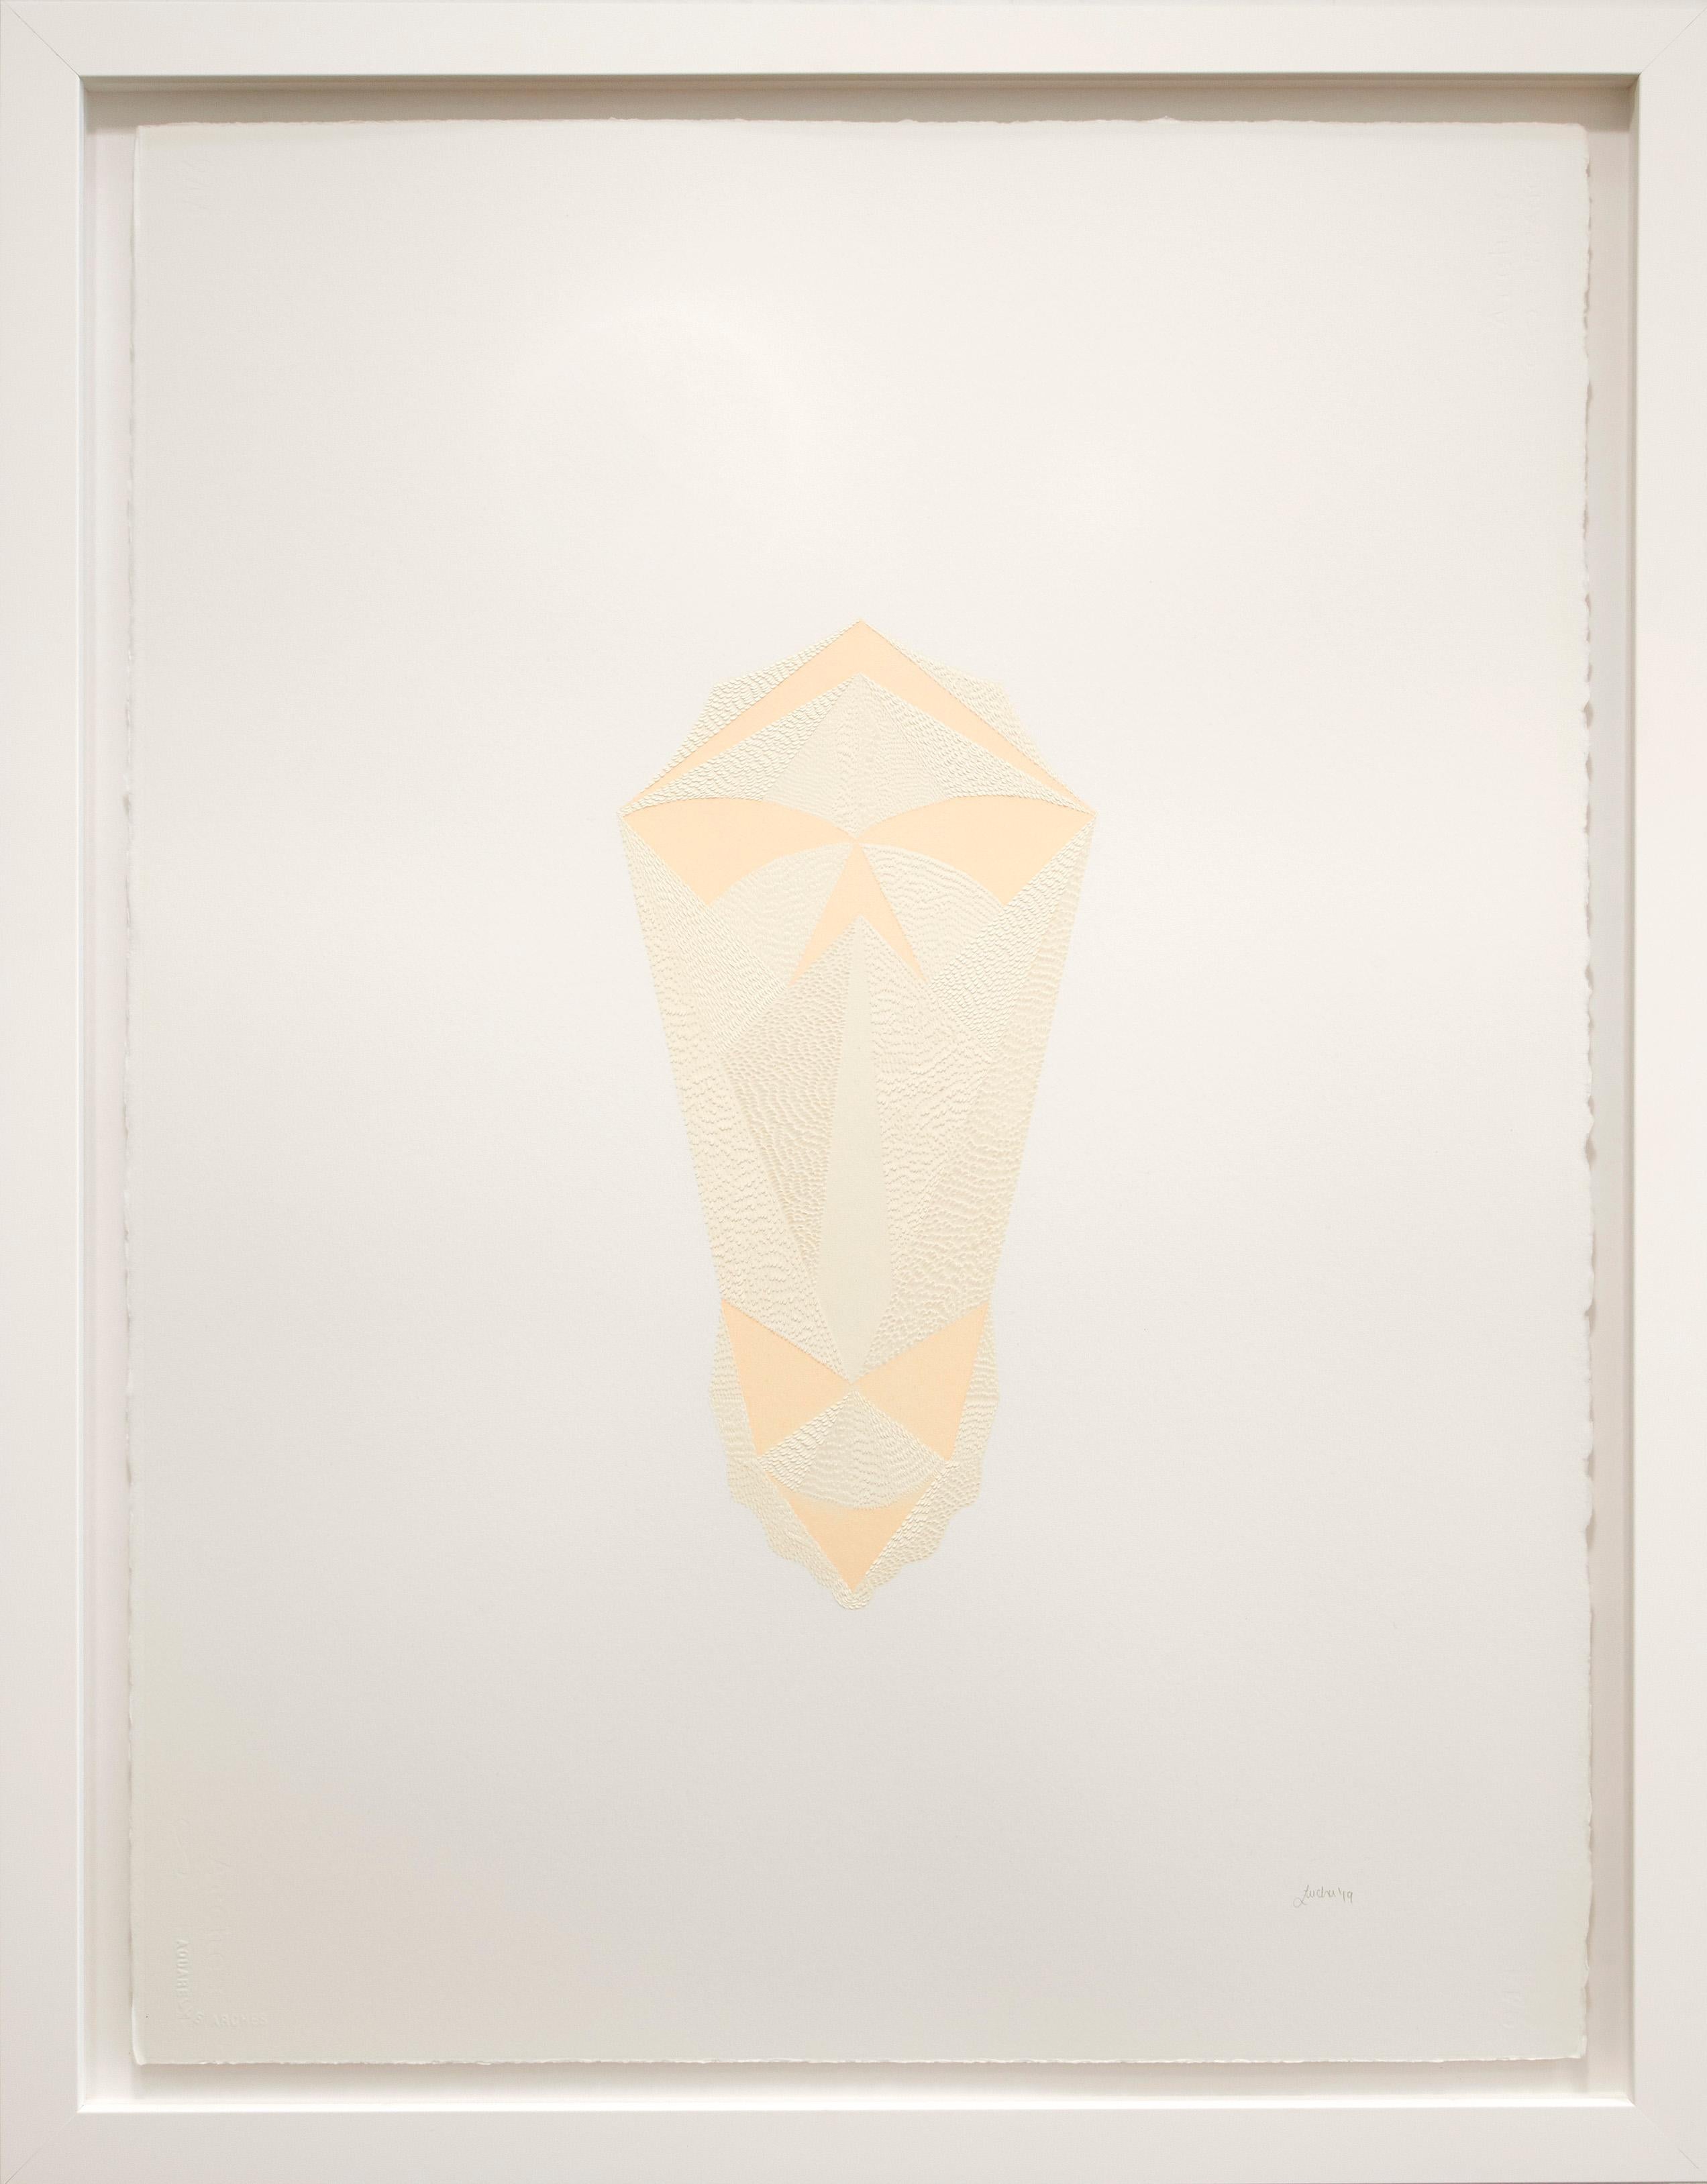 Knife Drawing Papagayo VI - Manipulated Textured Paper (Yellow + Beige)